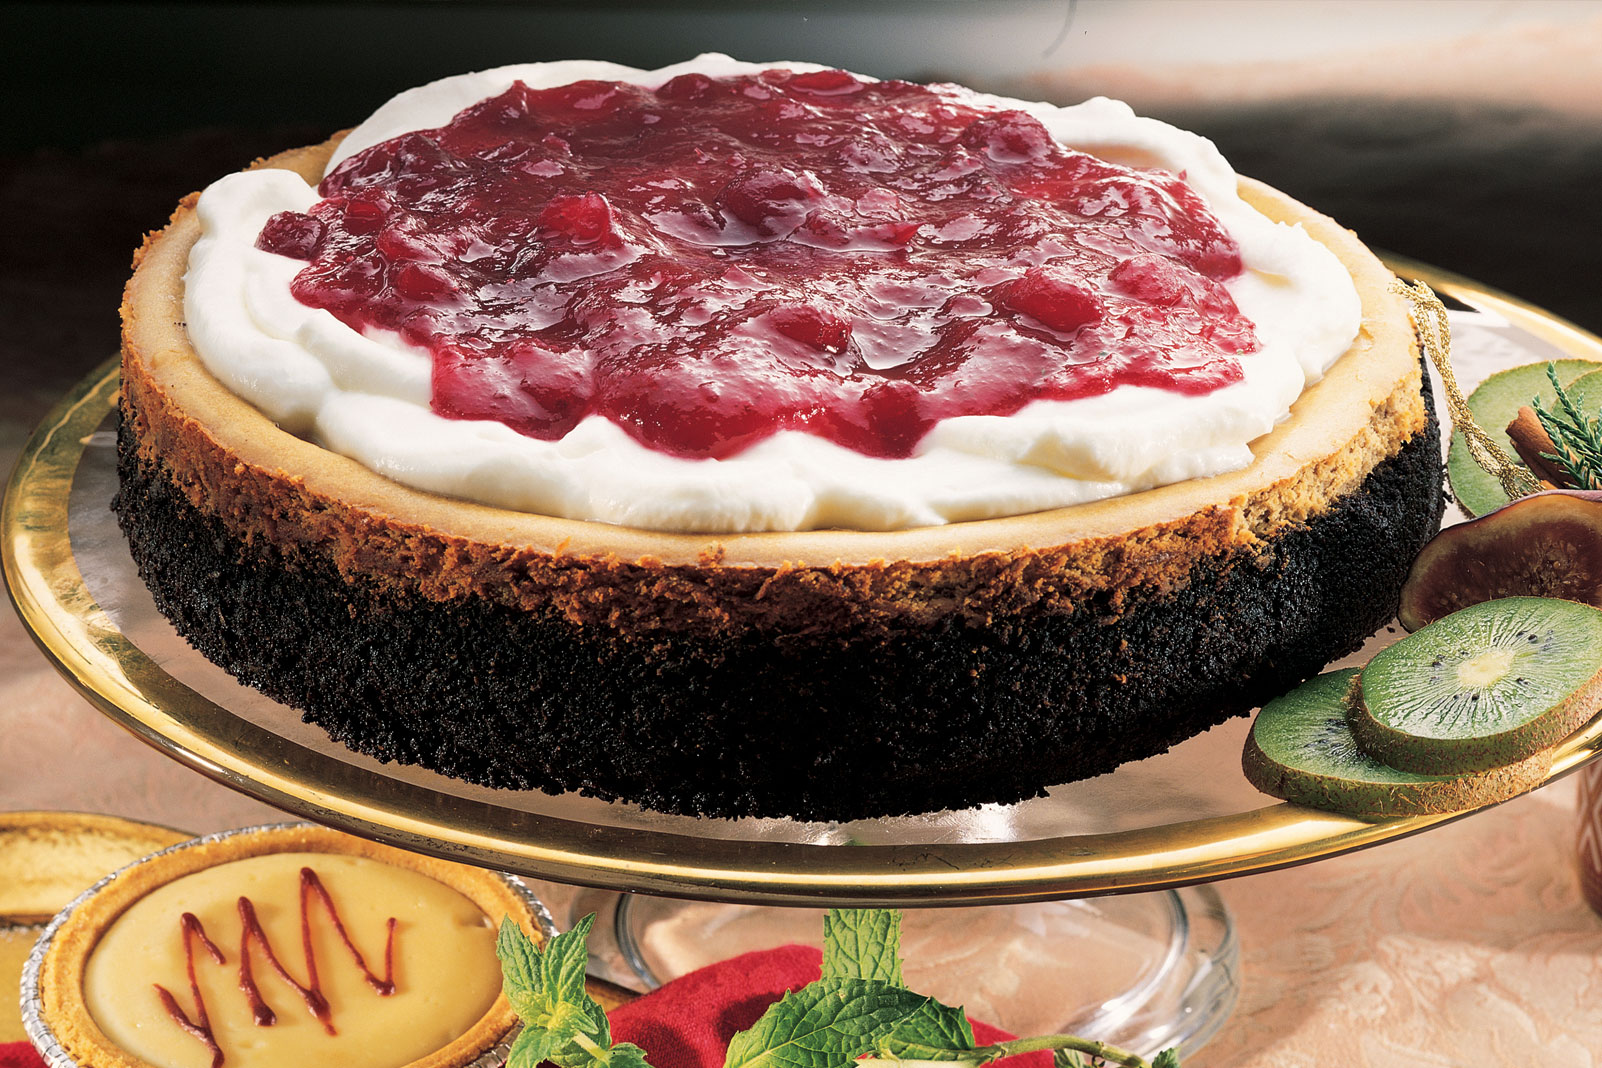 Chocolate Espresso Cheesecake with Cranberry Topping